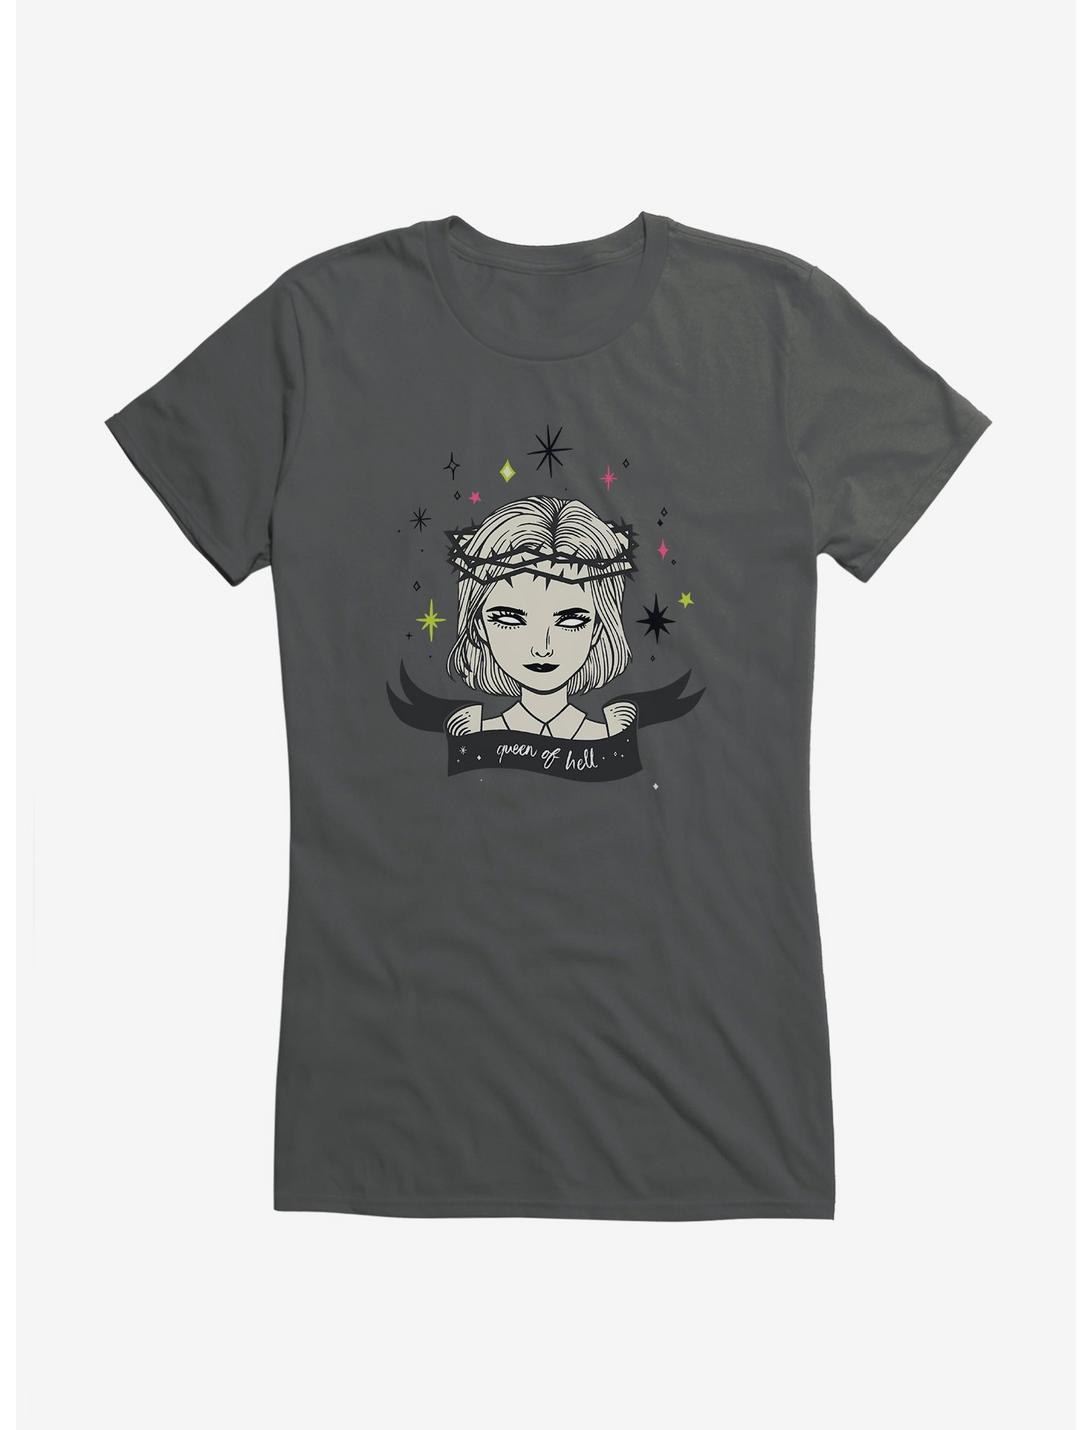 Chilling Adventures Of Sabrina Queen Of Hell Girls T-Shirt, CHARCOAL, hi-res